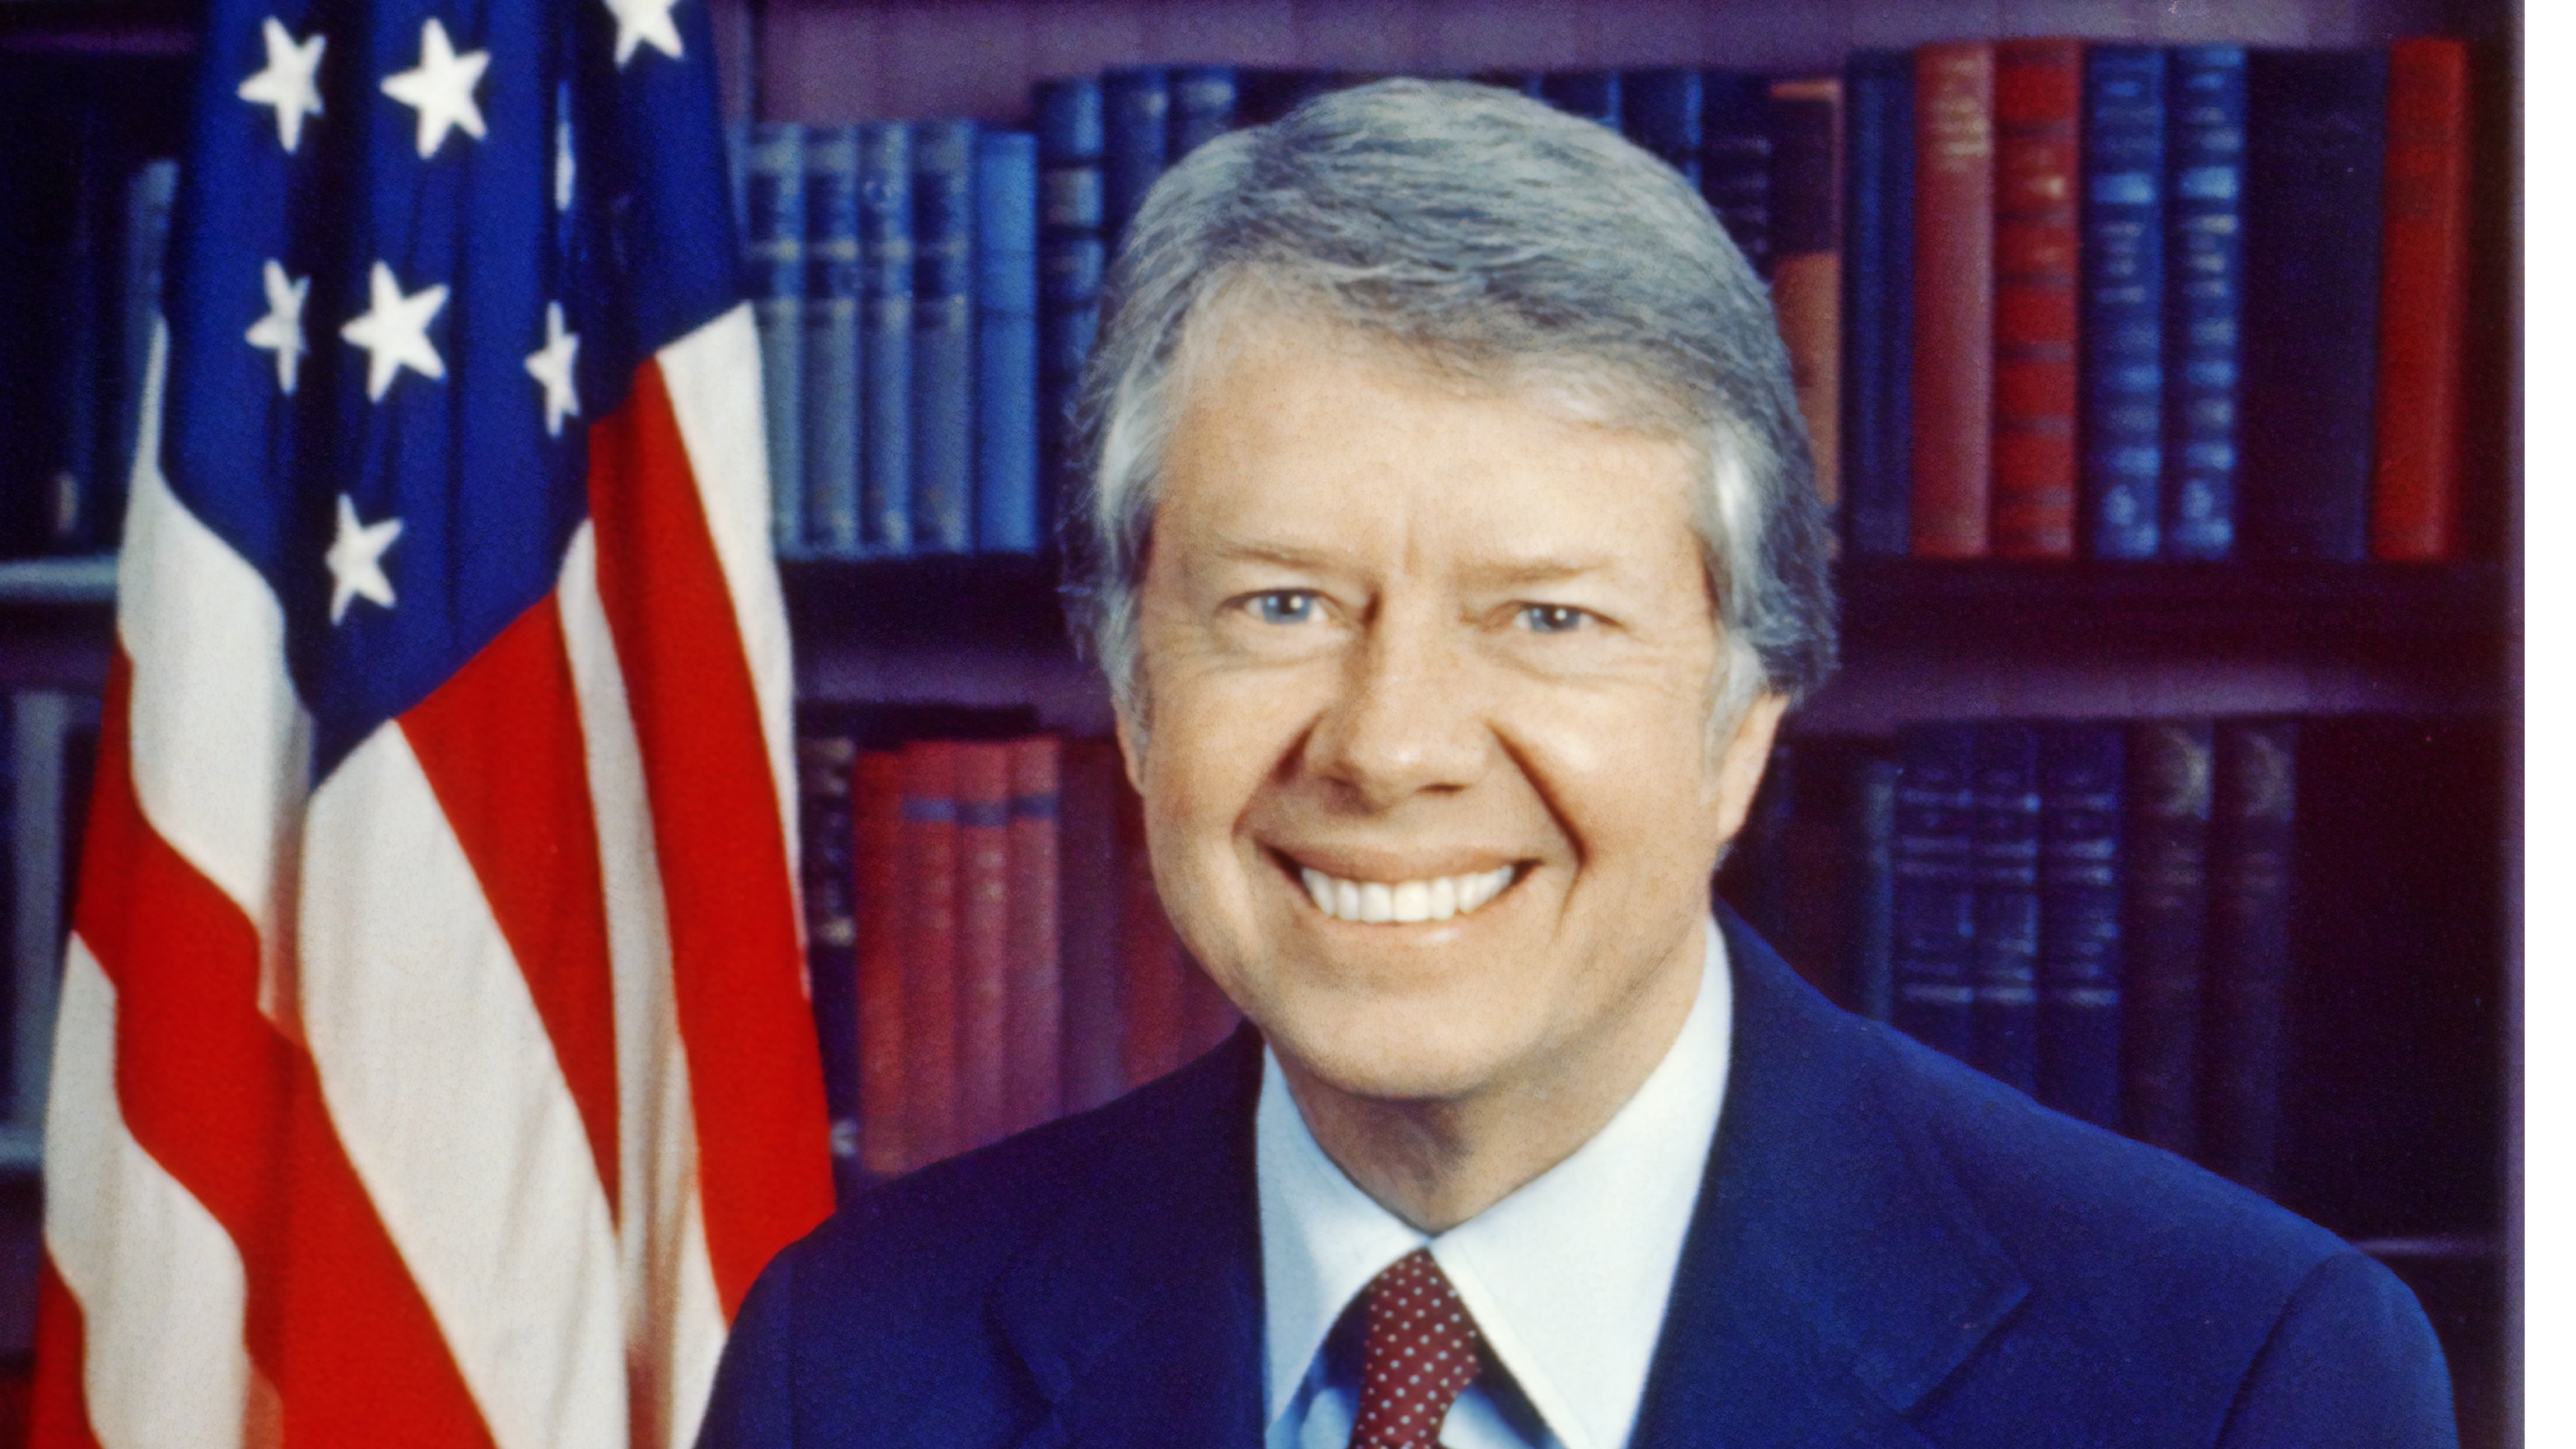 Jimmy Carter warns of widening abyss ahead of Capitol riots anniversary